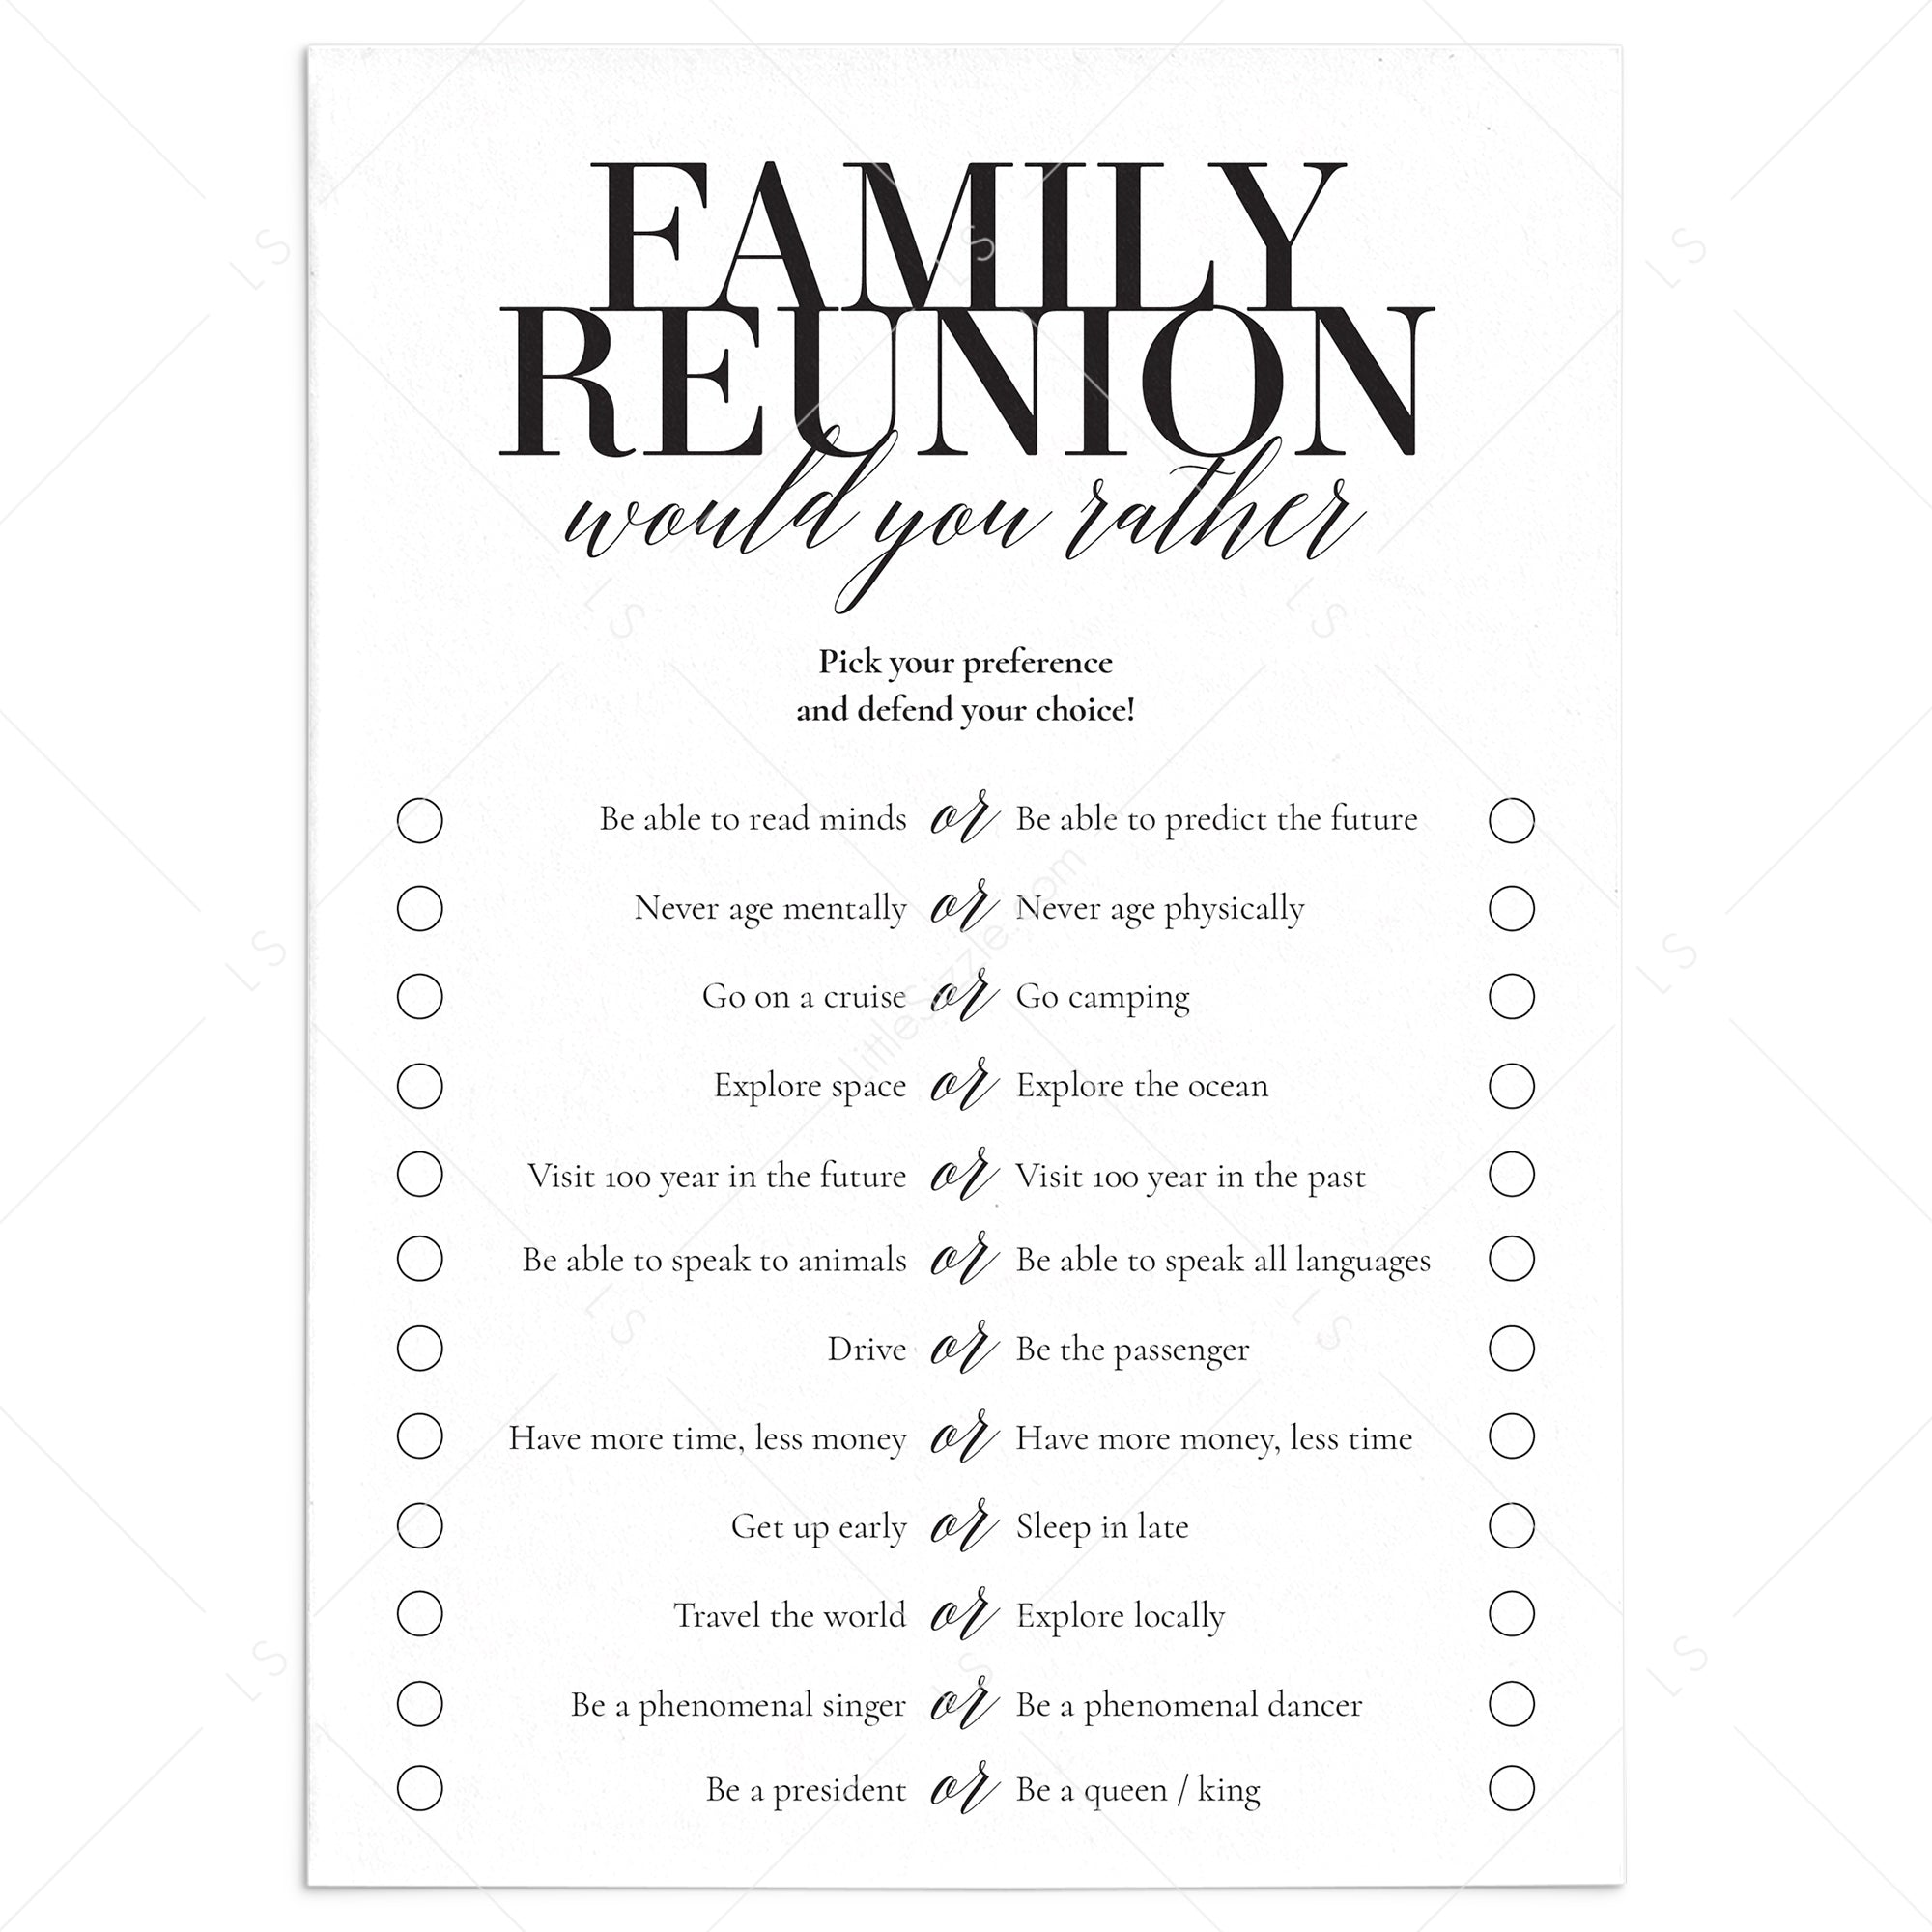 Printable Would You Rather Game for Families by LittleSizzle